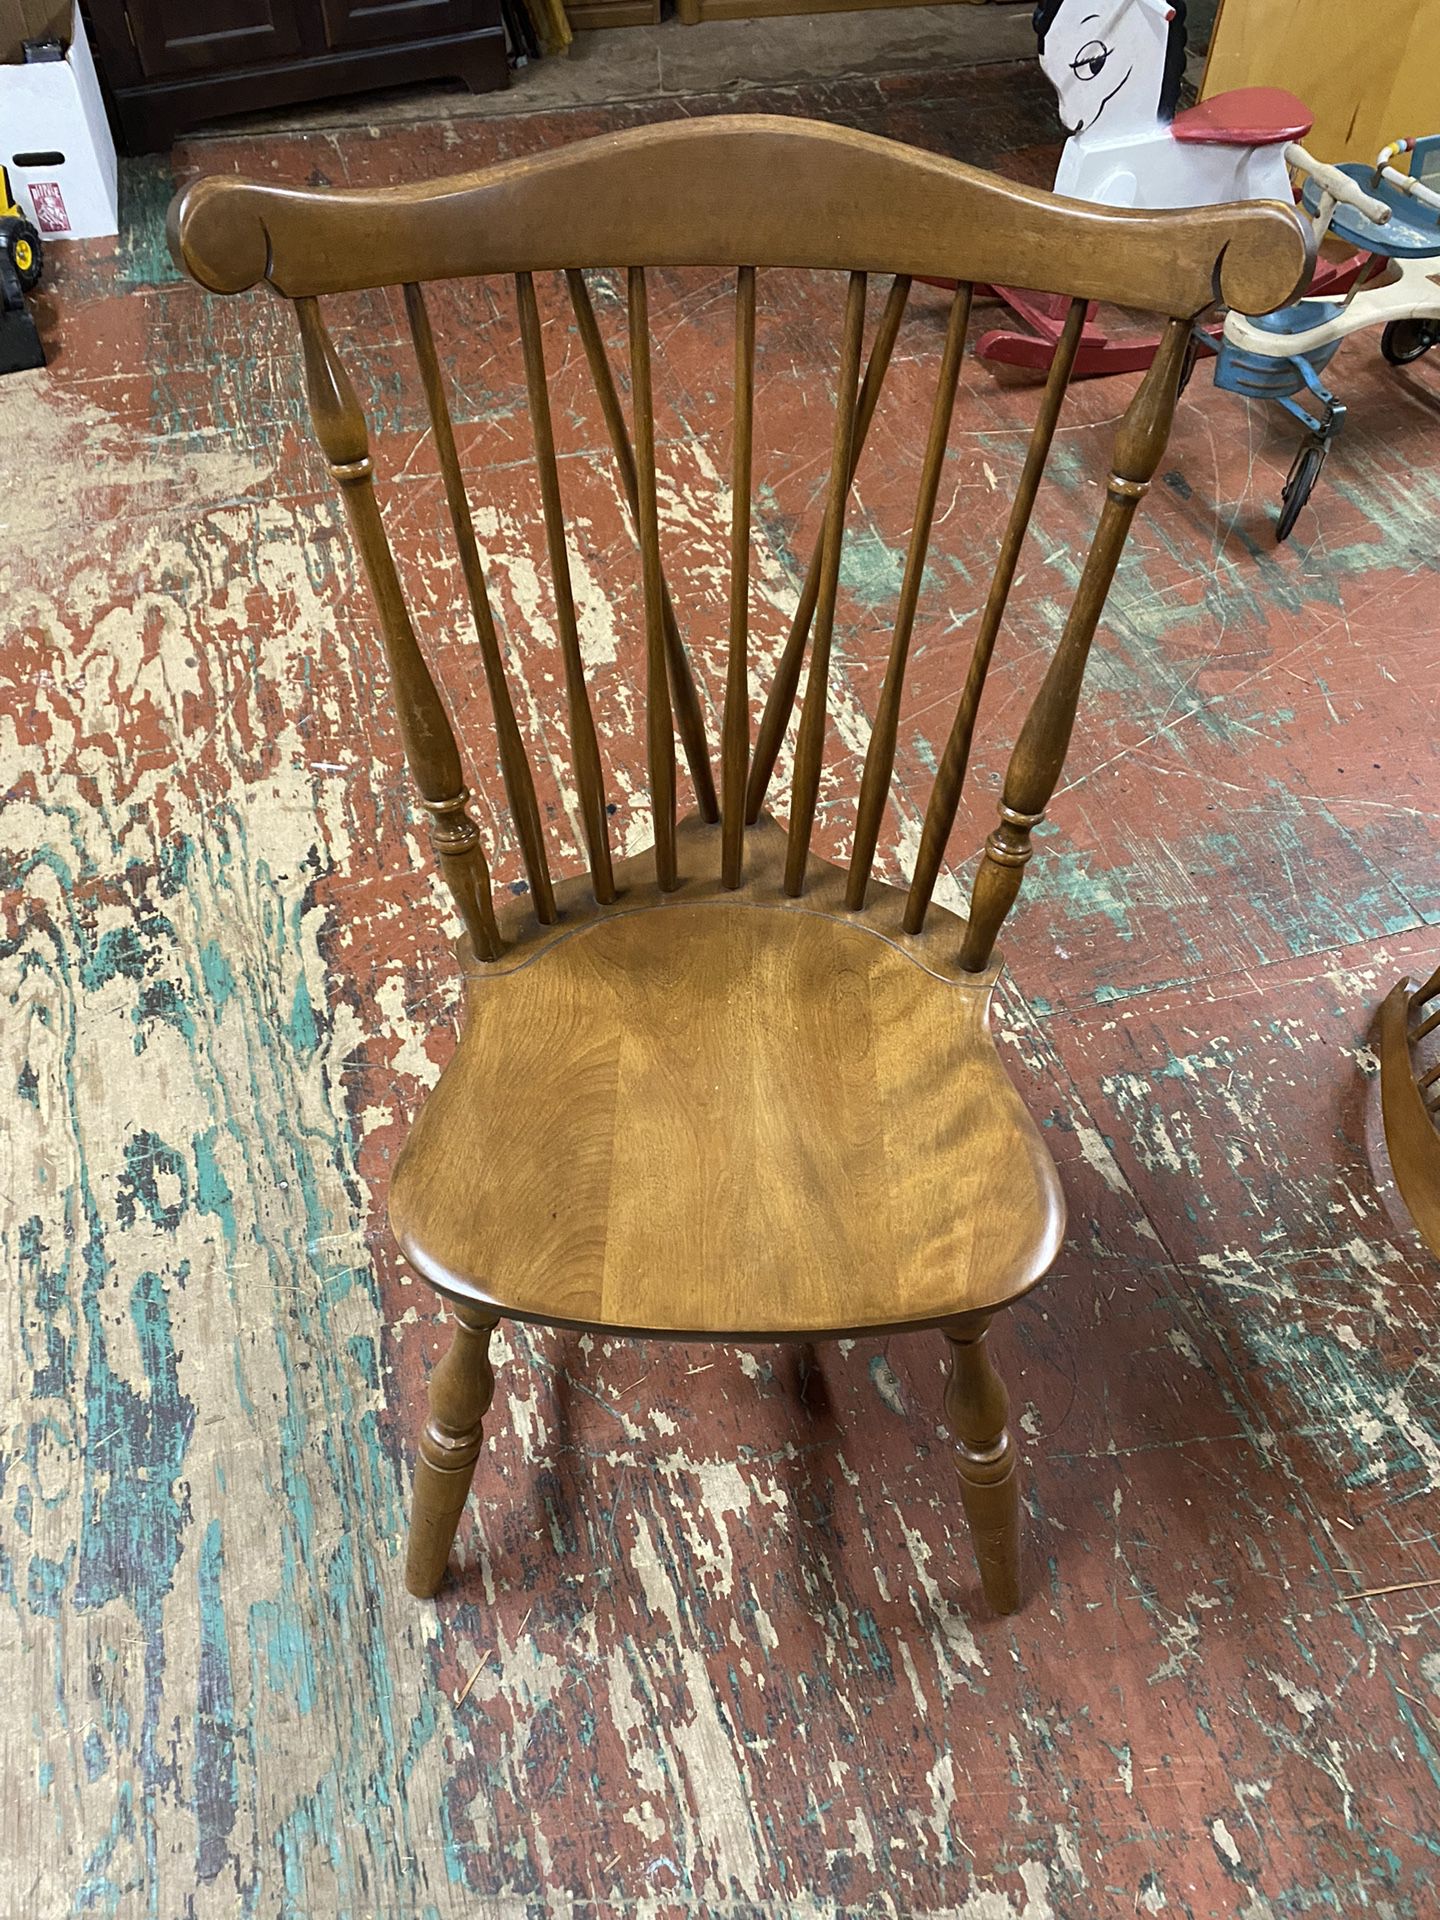 Bent & Bros Set of 5 Colonial Wooden Chairs $35 Set